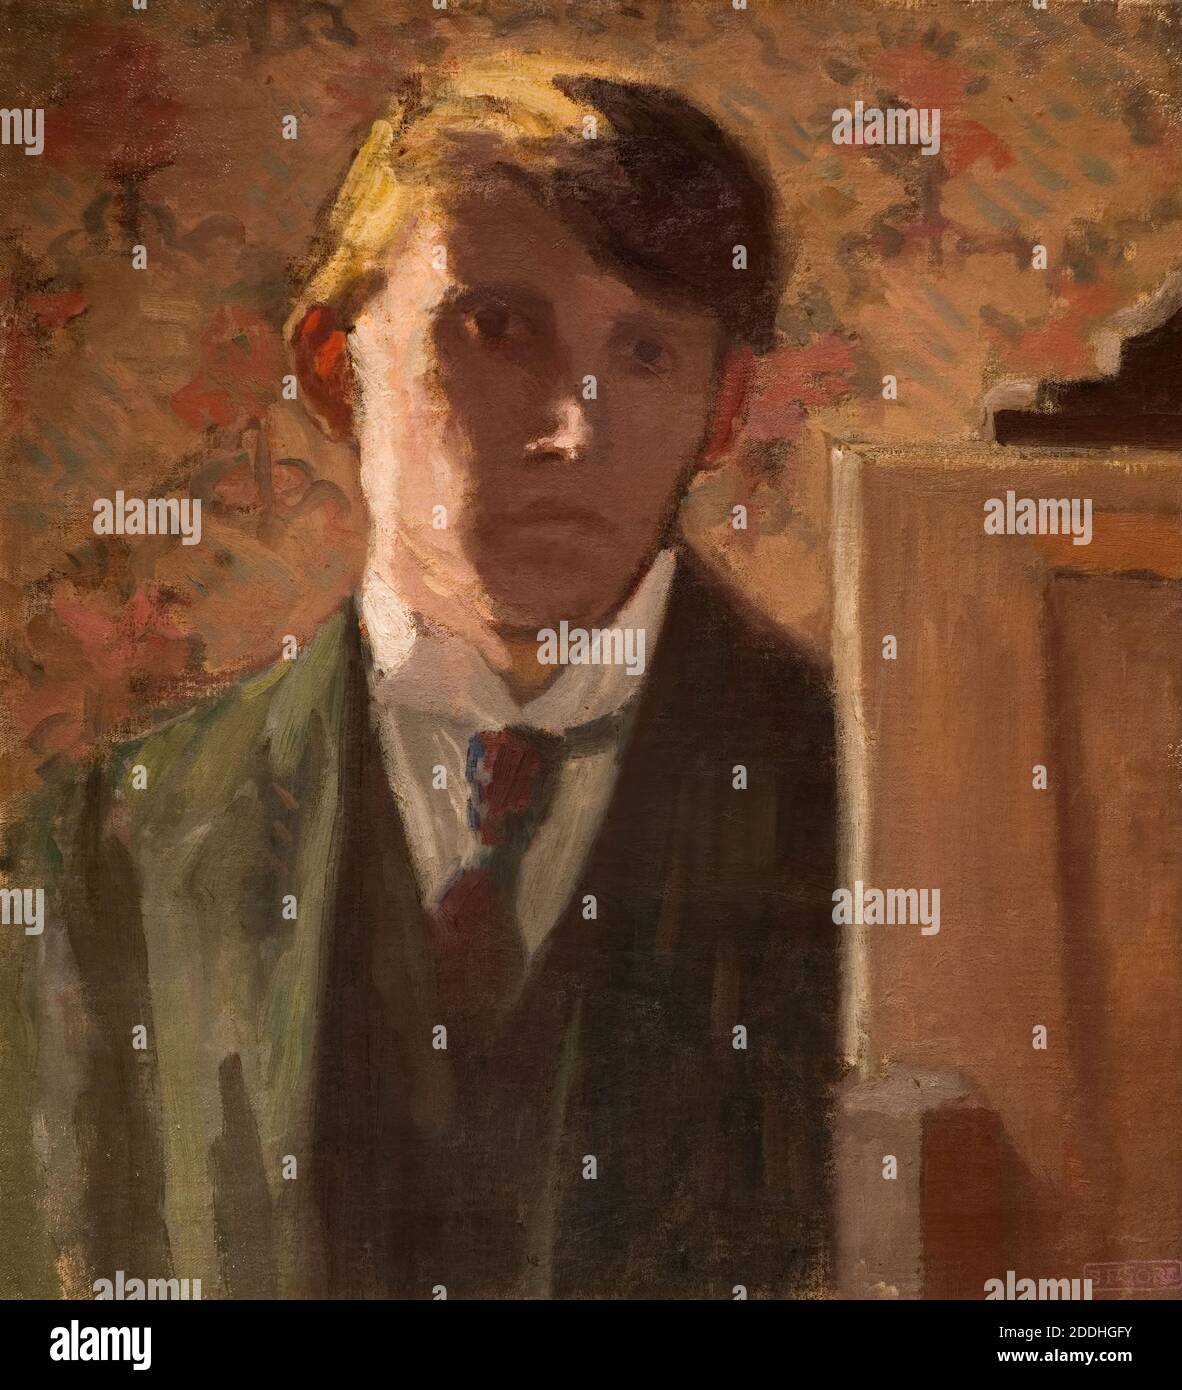 Portrait of the Artist, 1906 By Spencer Frederick Gore (d. 1914), Self-Portrait, Art Movement, Post-Impressionism Stock Photo